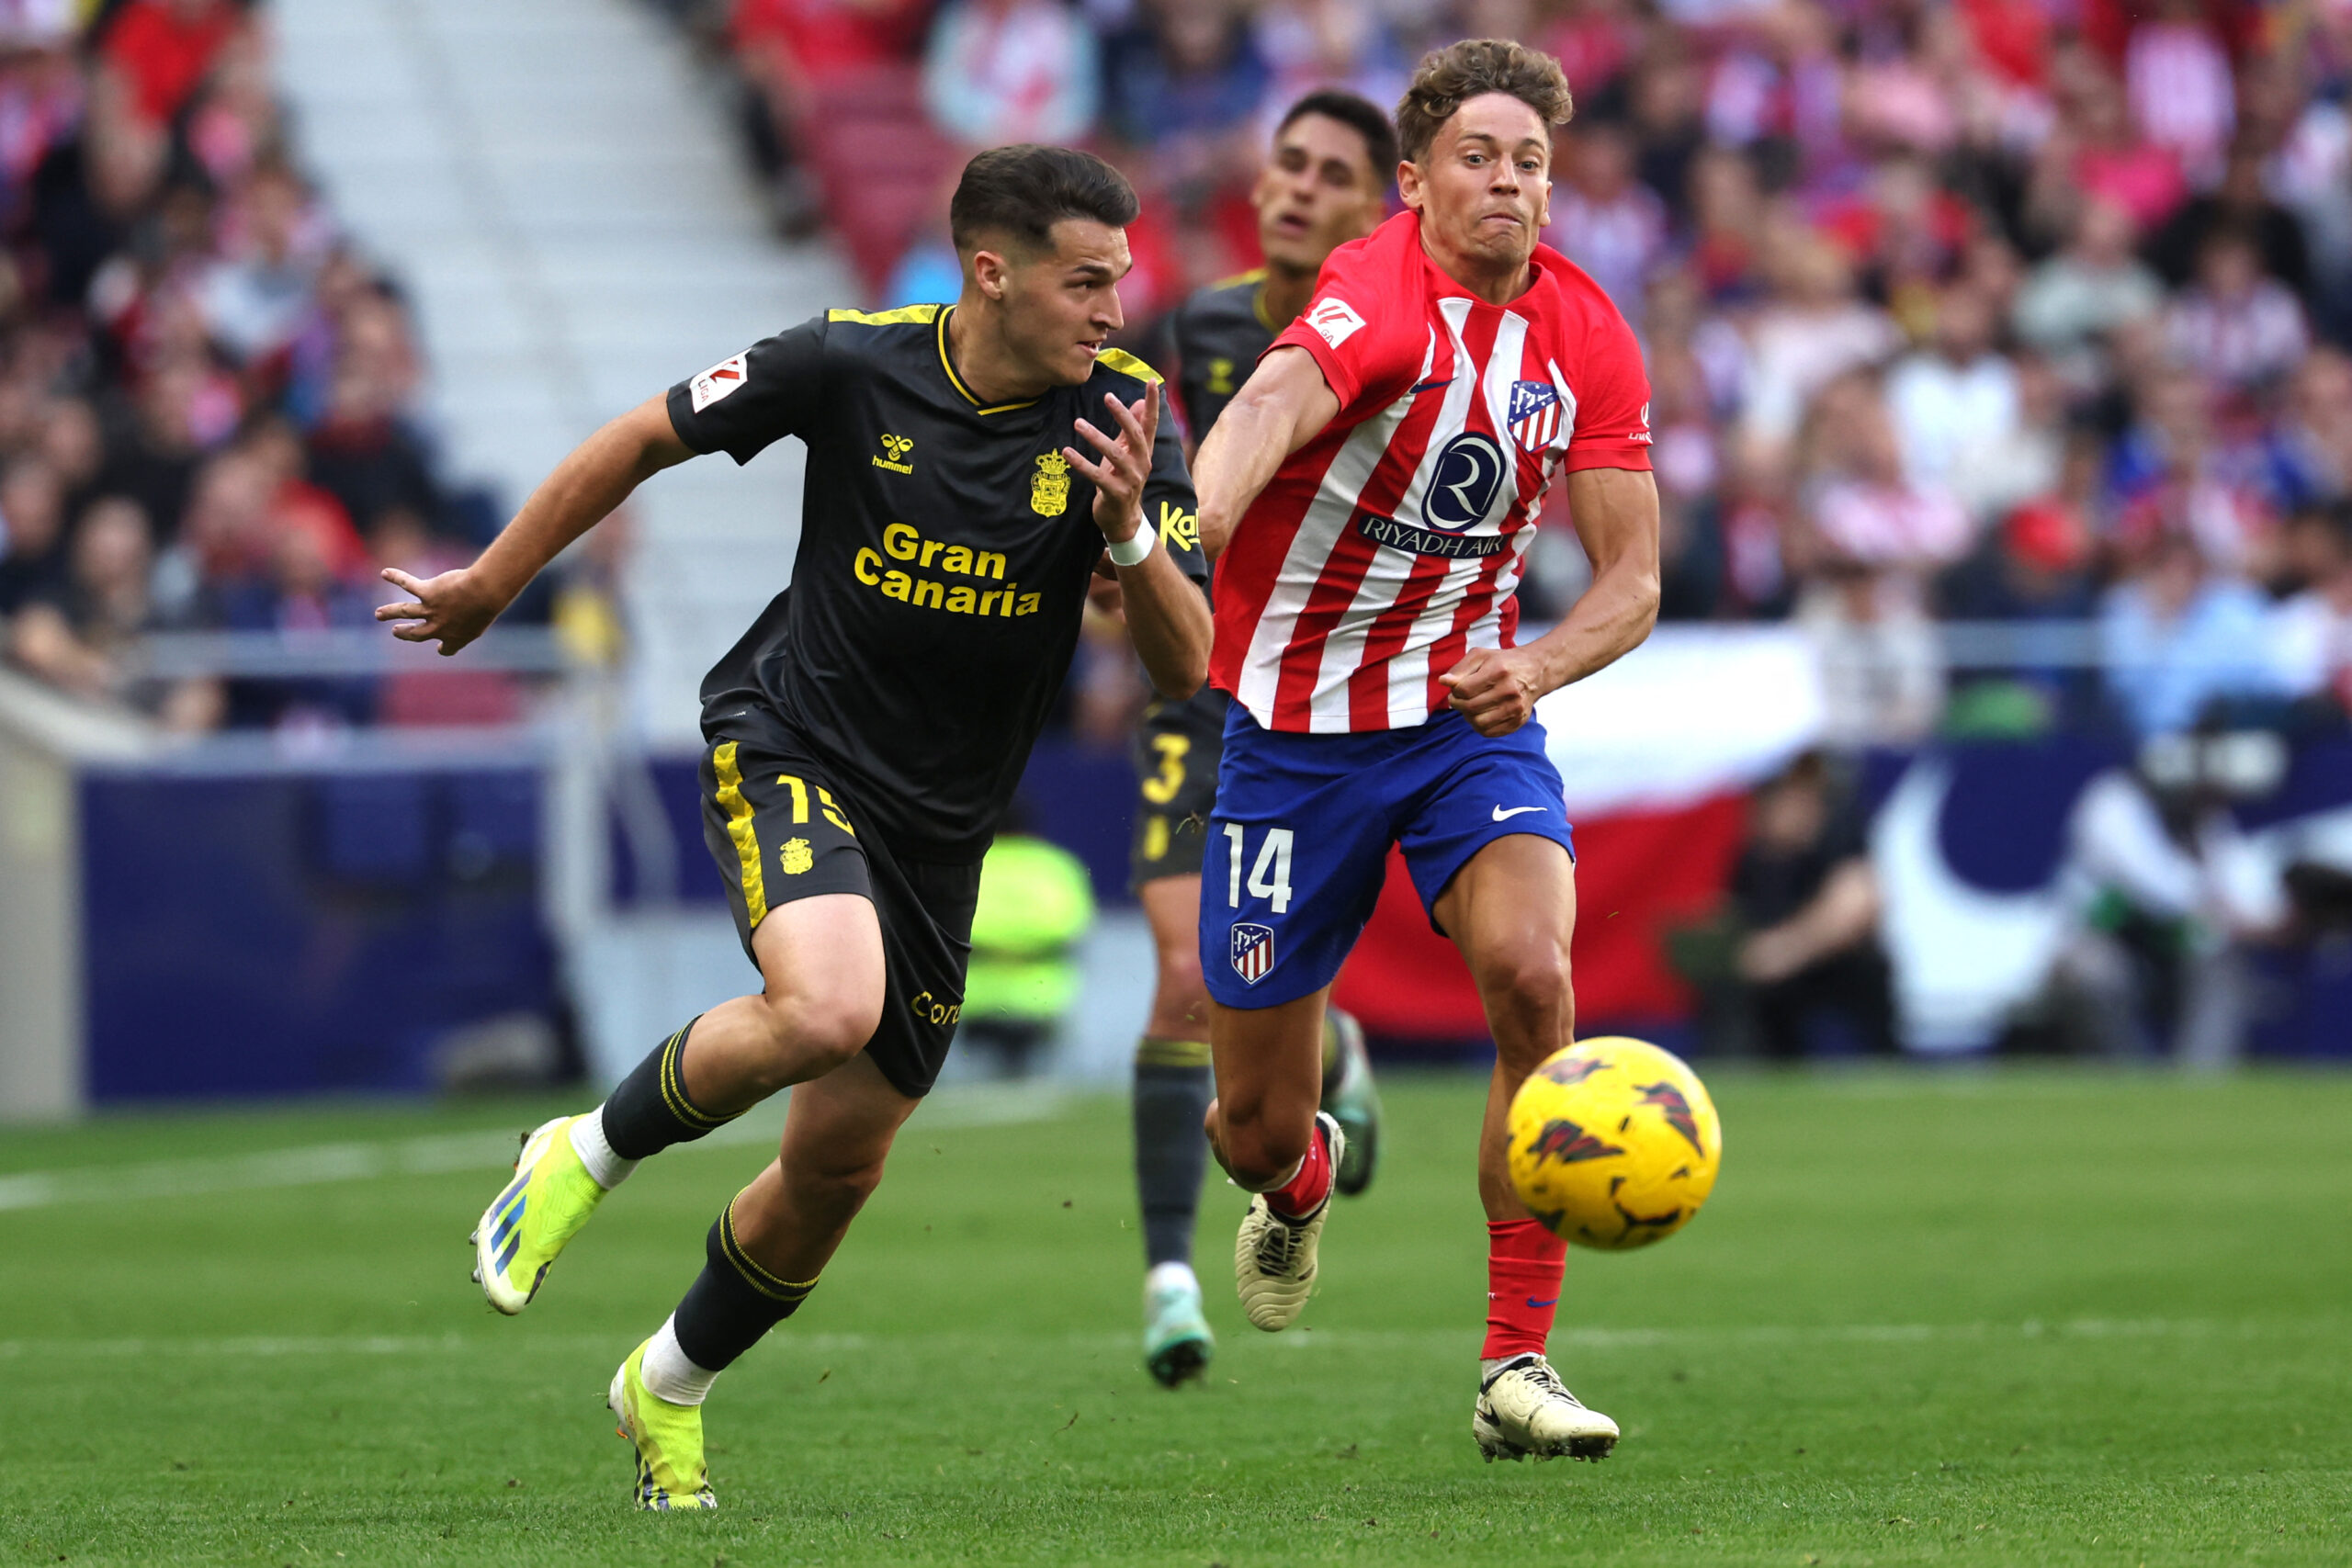 Las Palmas' Spanish defender #15 Mika Marmol is challenged by Atletico Madrid's Spanish midfielder #14 Marcos Llorente during the Spanish league football match between Club Atletico de Madrid and UD Las Palmas at the Metropolitano stadium in Madrid on February 17, 2024.